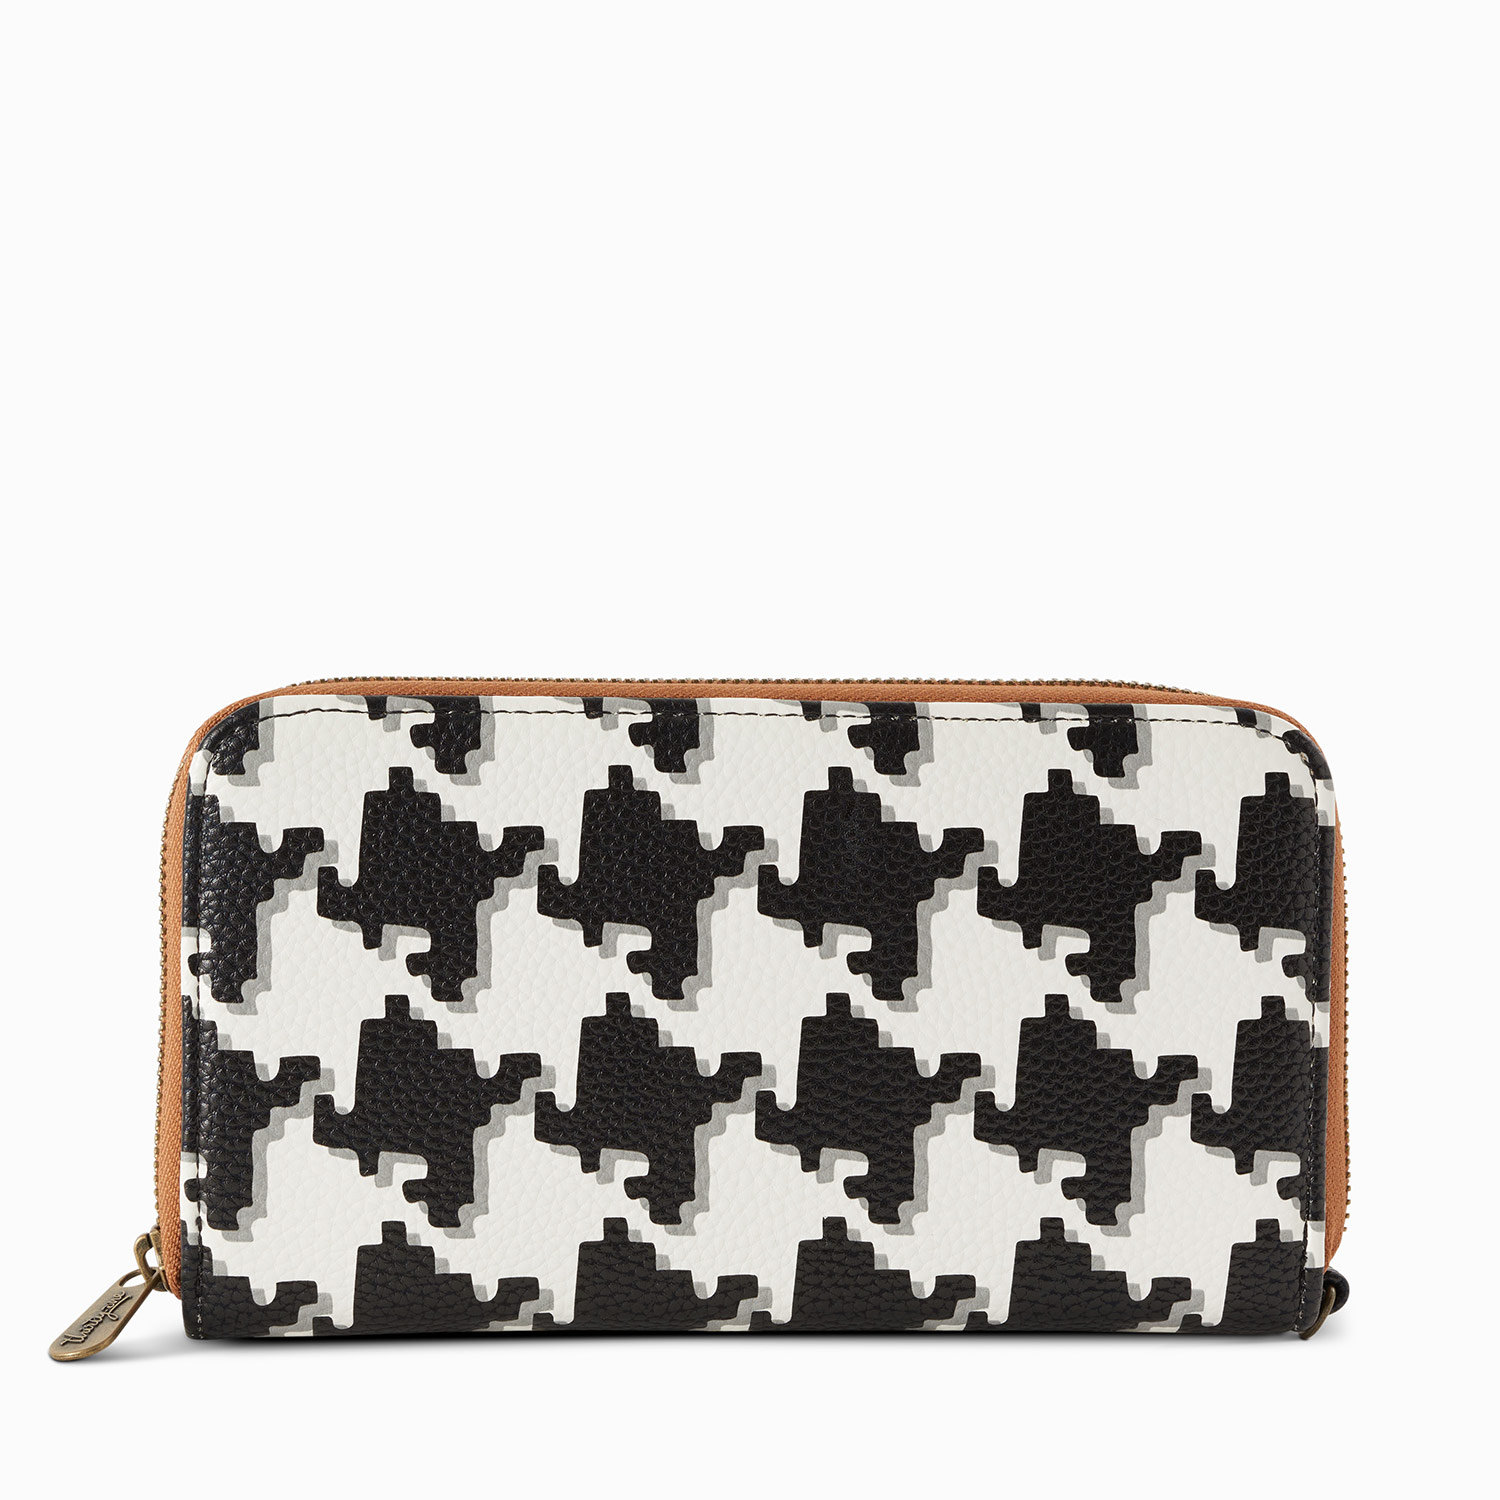 Classic Houndstooth Pebble - All About The Benjamins - Thirty-One Gifts - Affordable  Purses, Totes & Bags